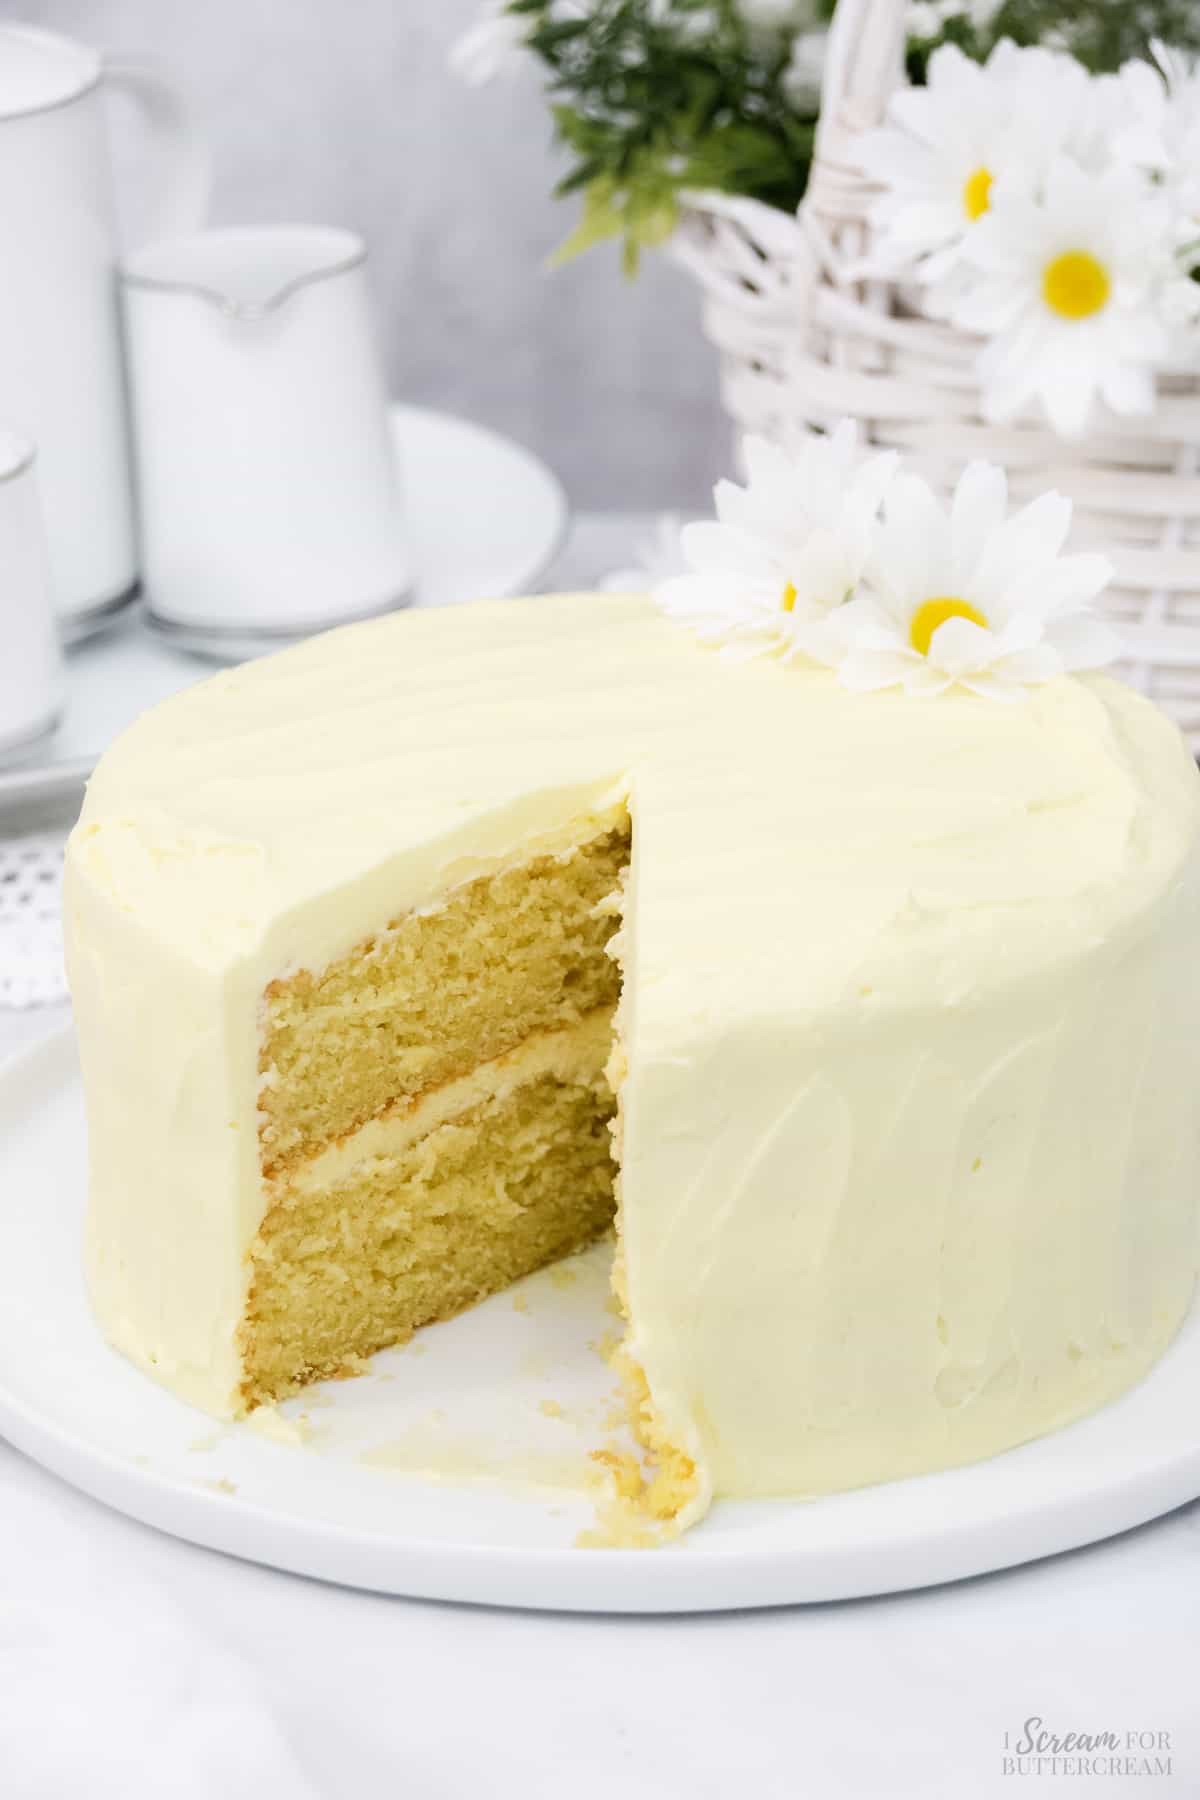 Decorated yellow cake with daisies on a white platter.